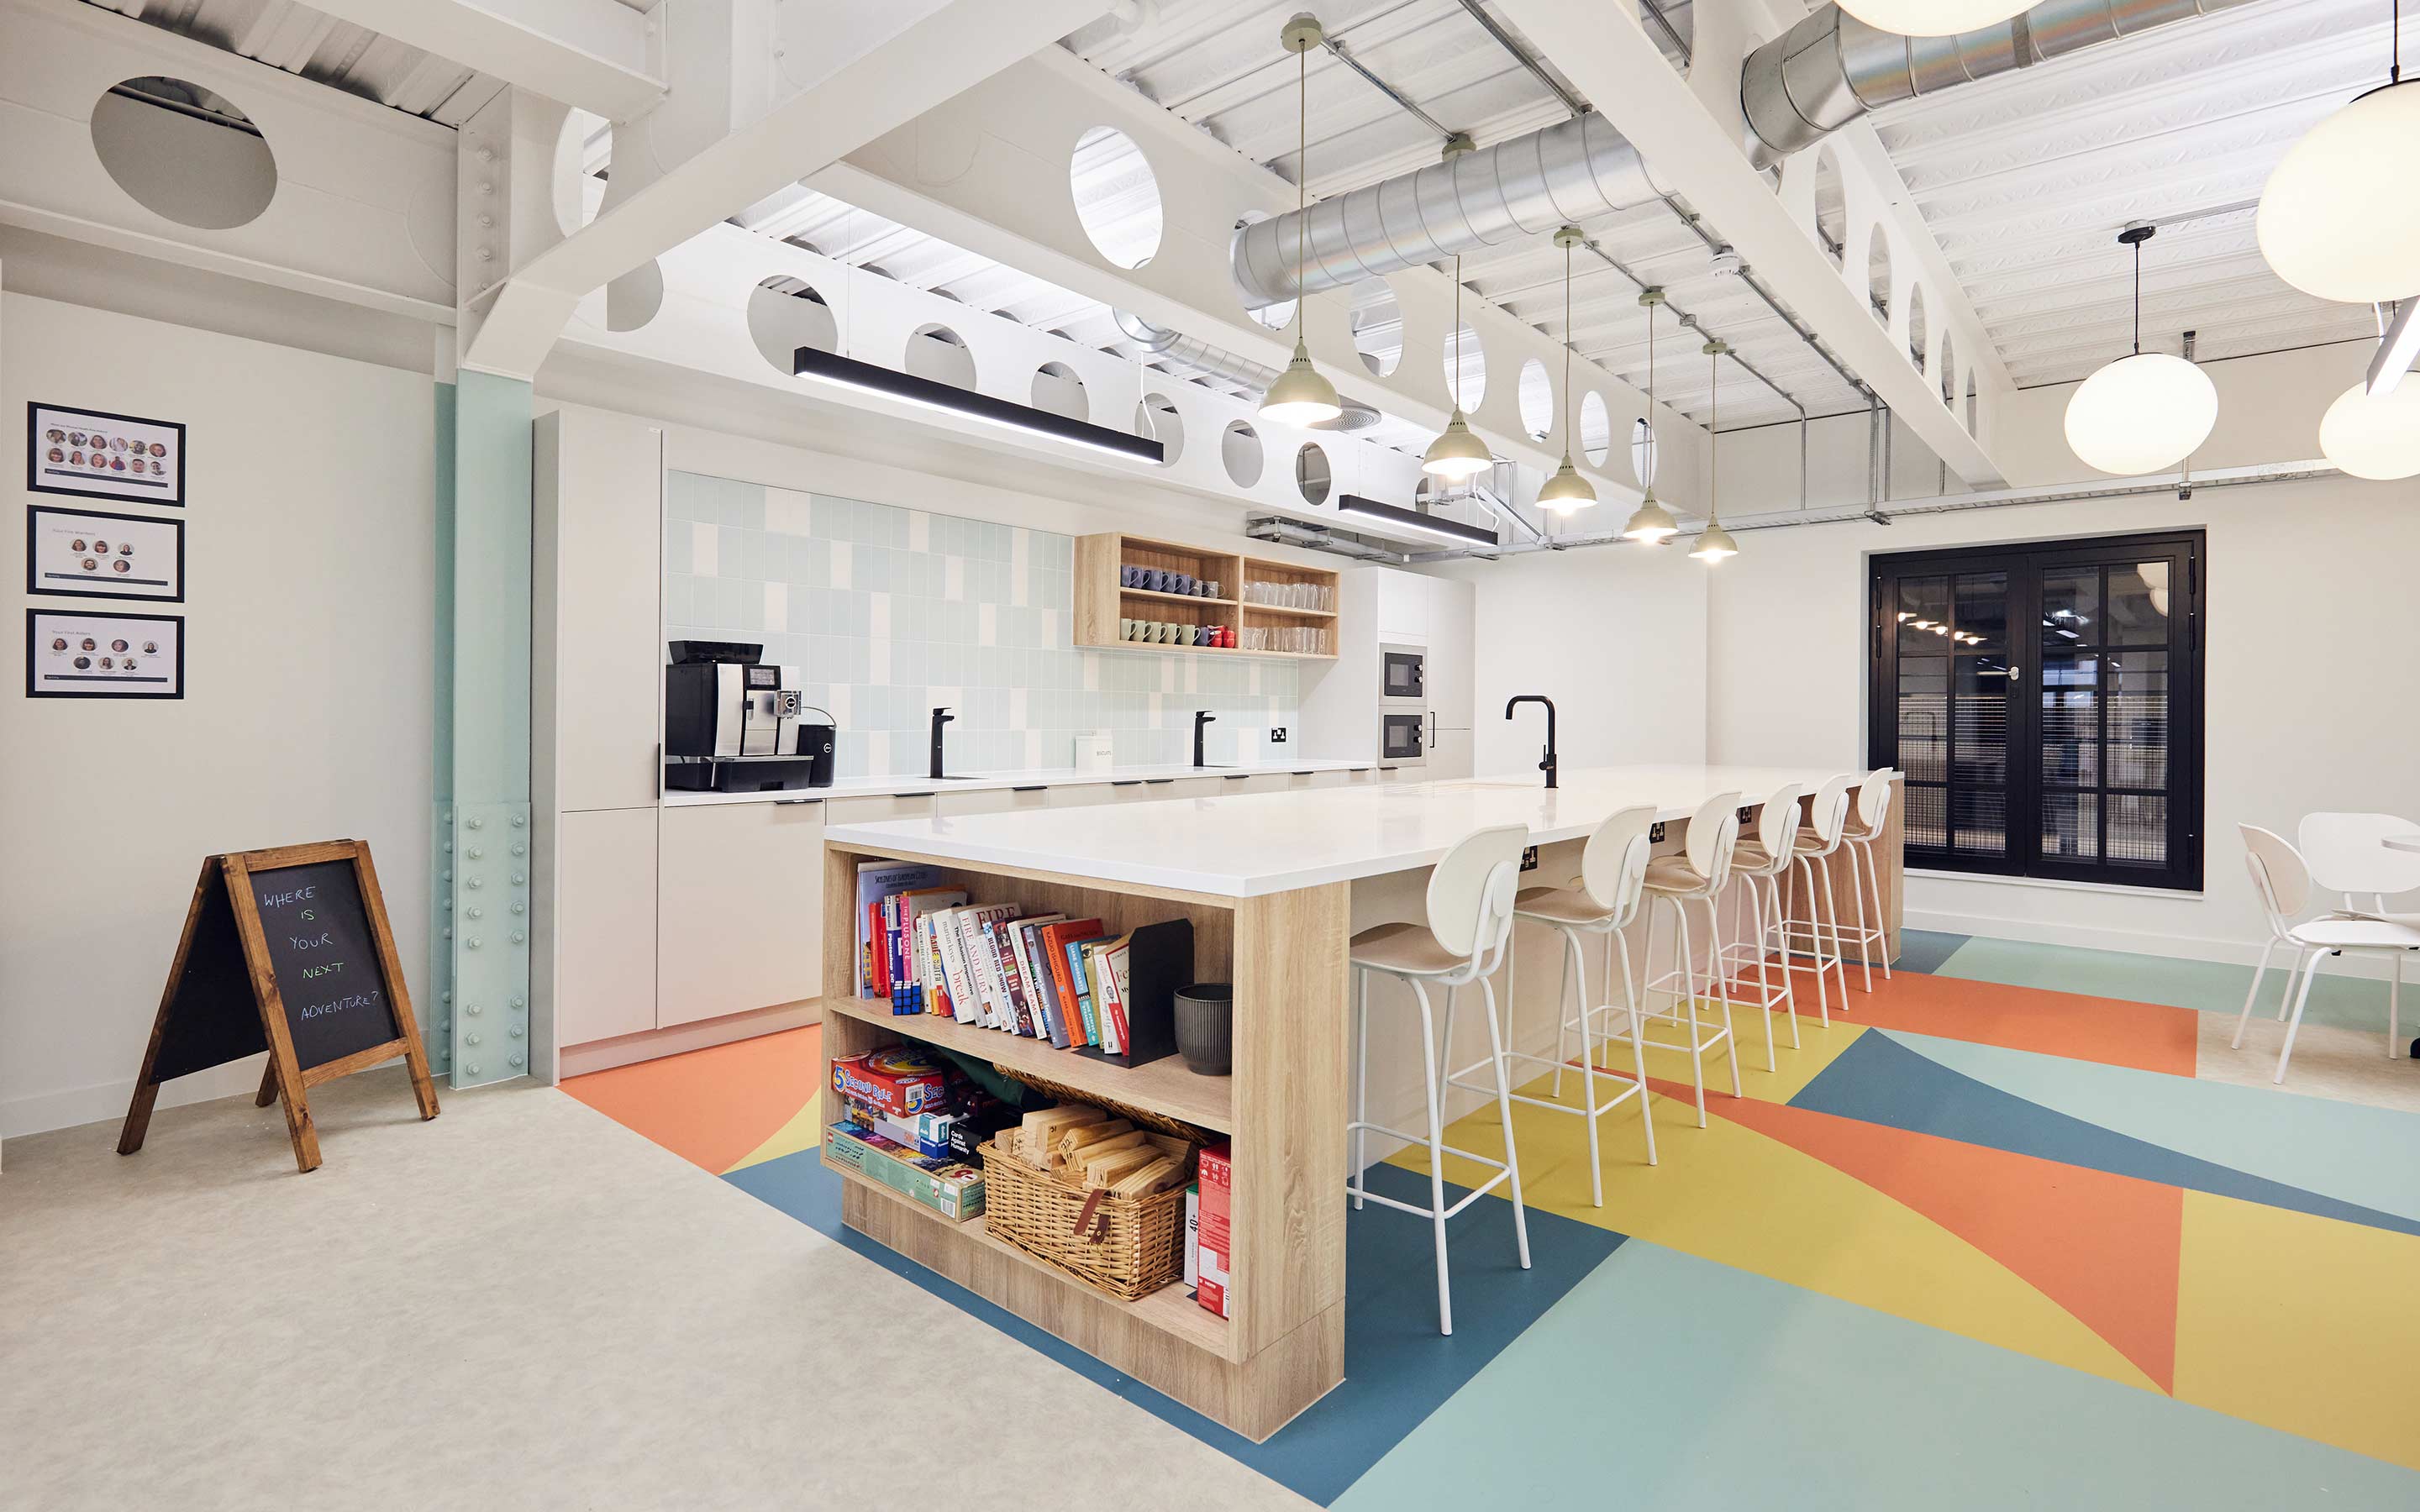 The image shows an office tea point area with colourful flooring, a breakfast bar with stools and sinks, and pendant lighting